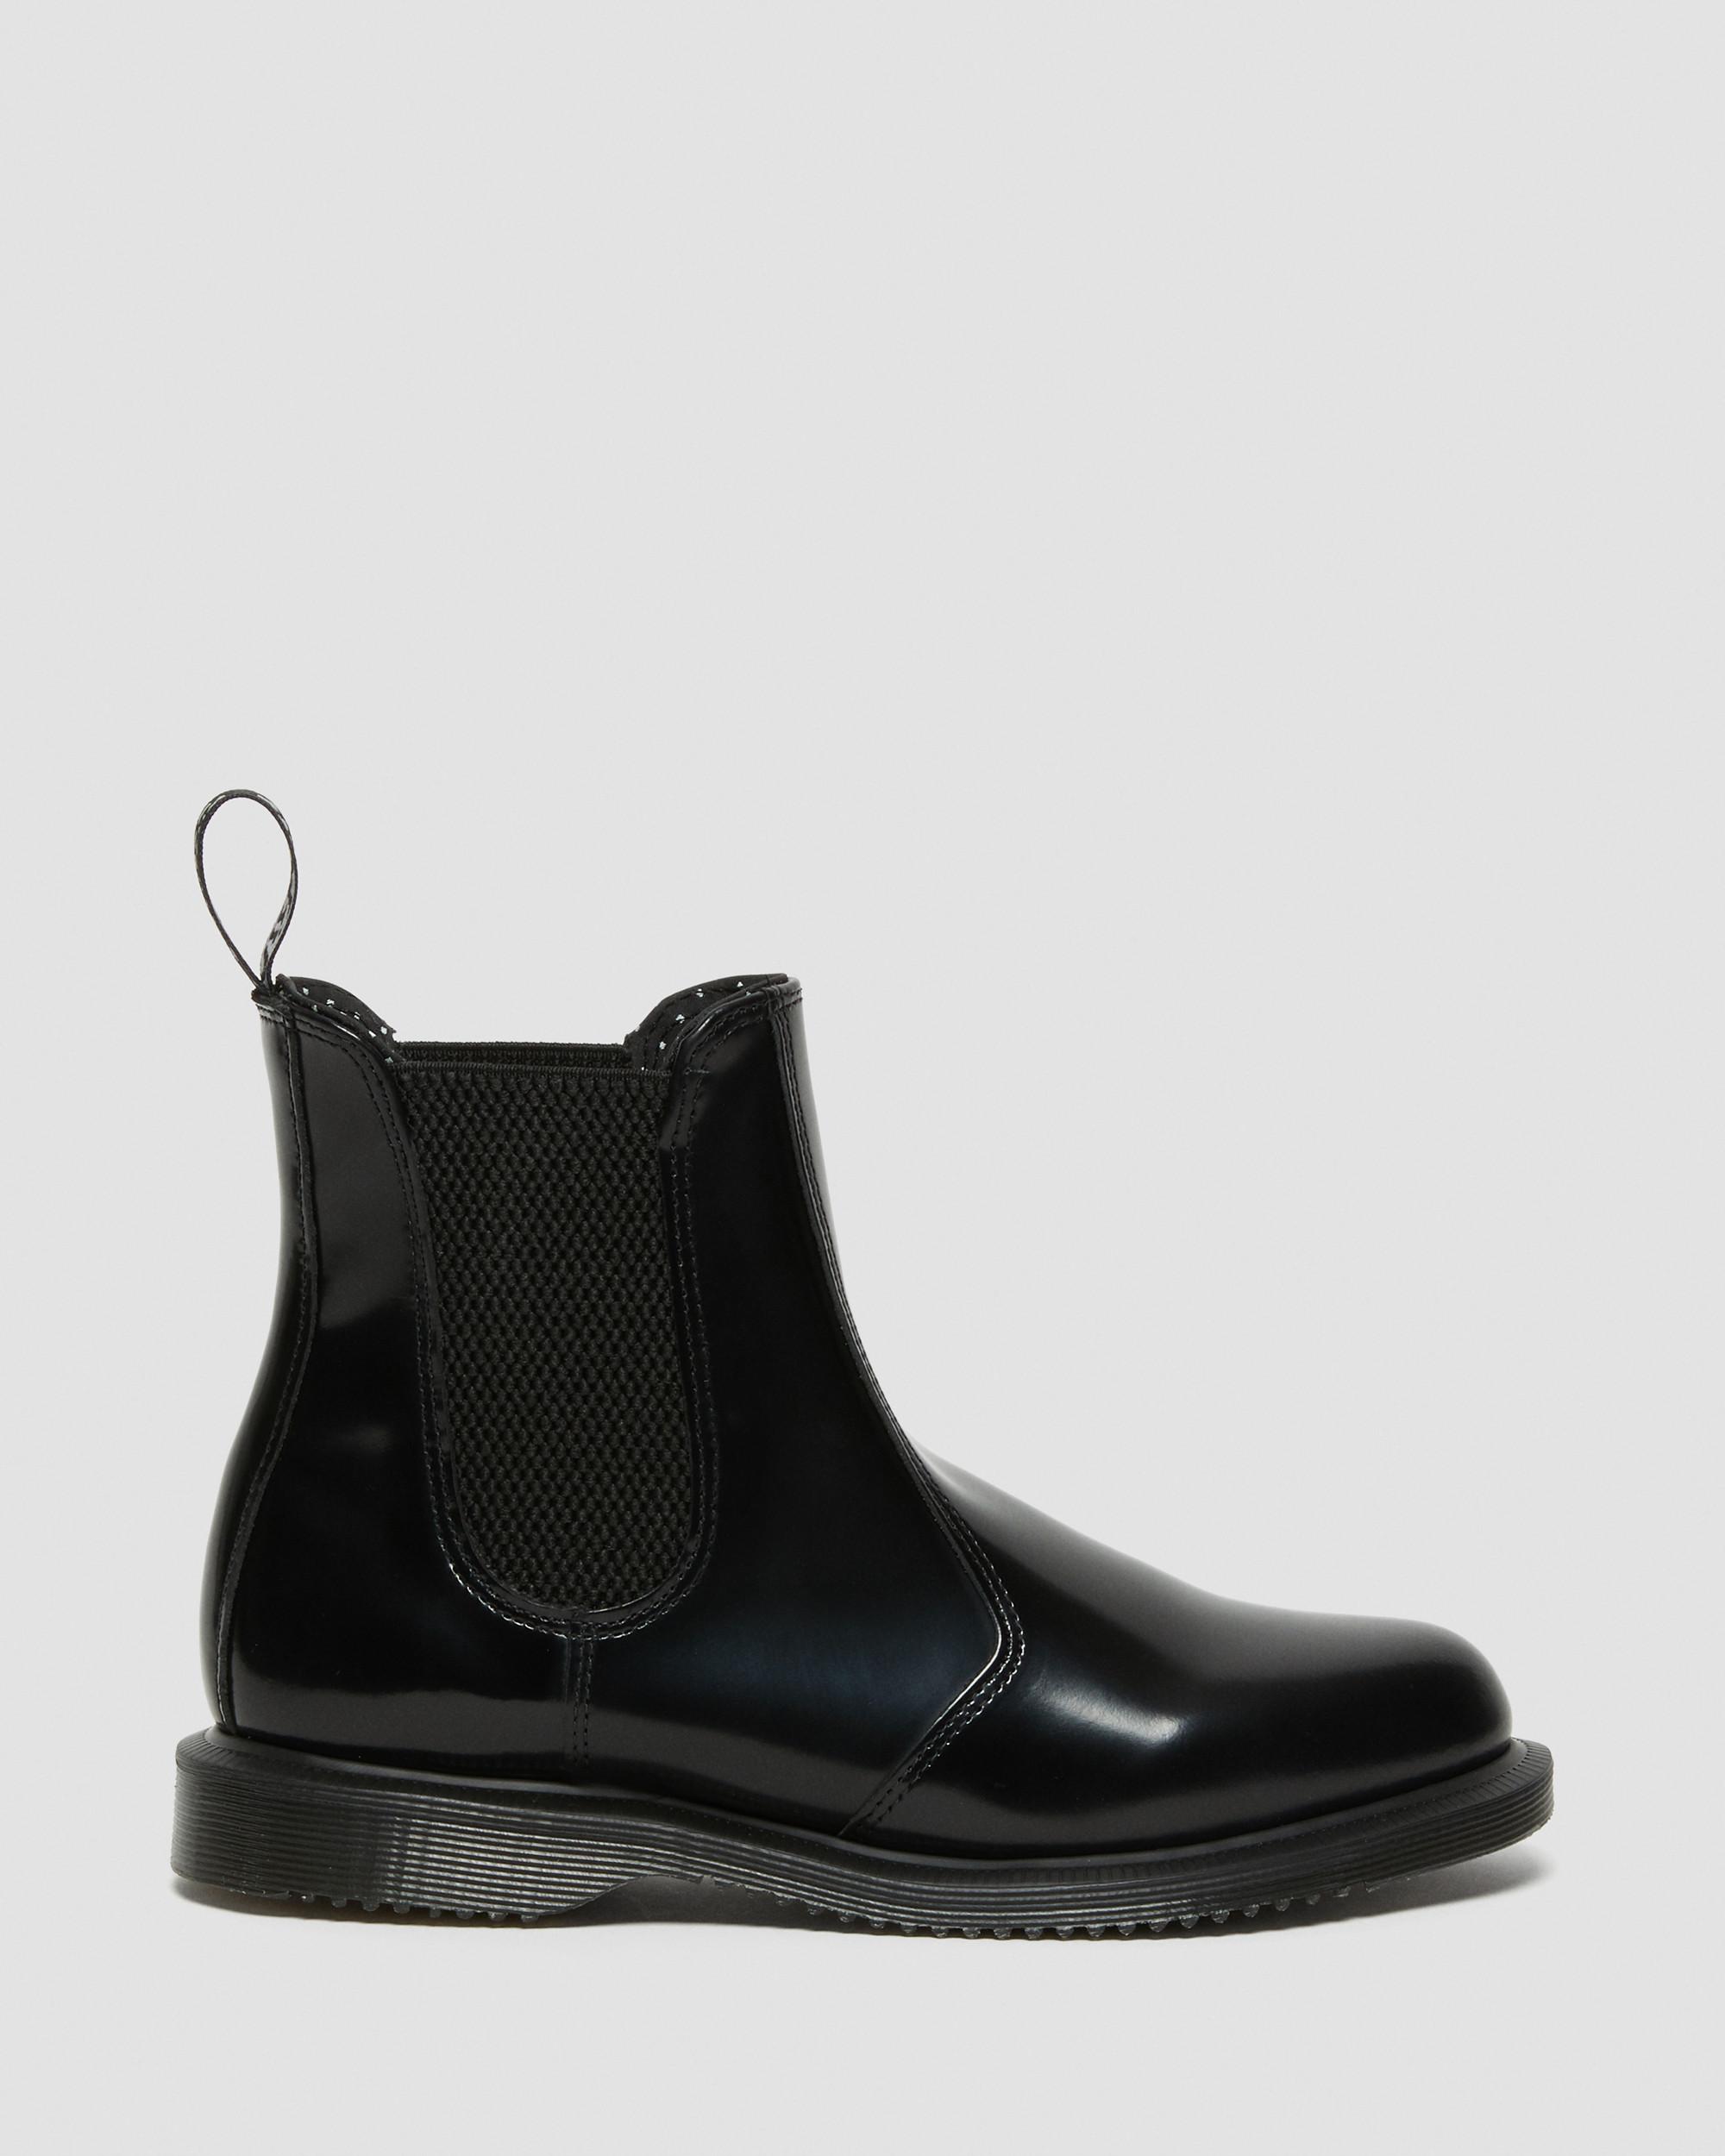 FLORA SMOOTH LEATHER CHELSEA BOOTS Martens